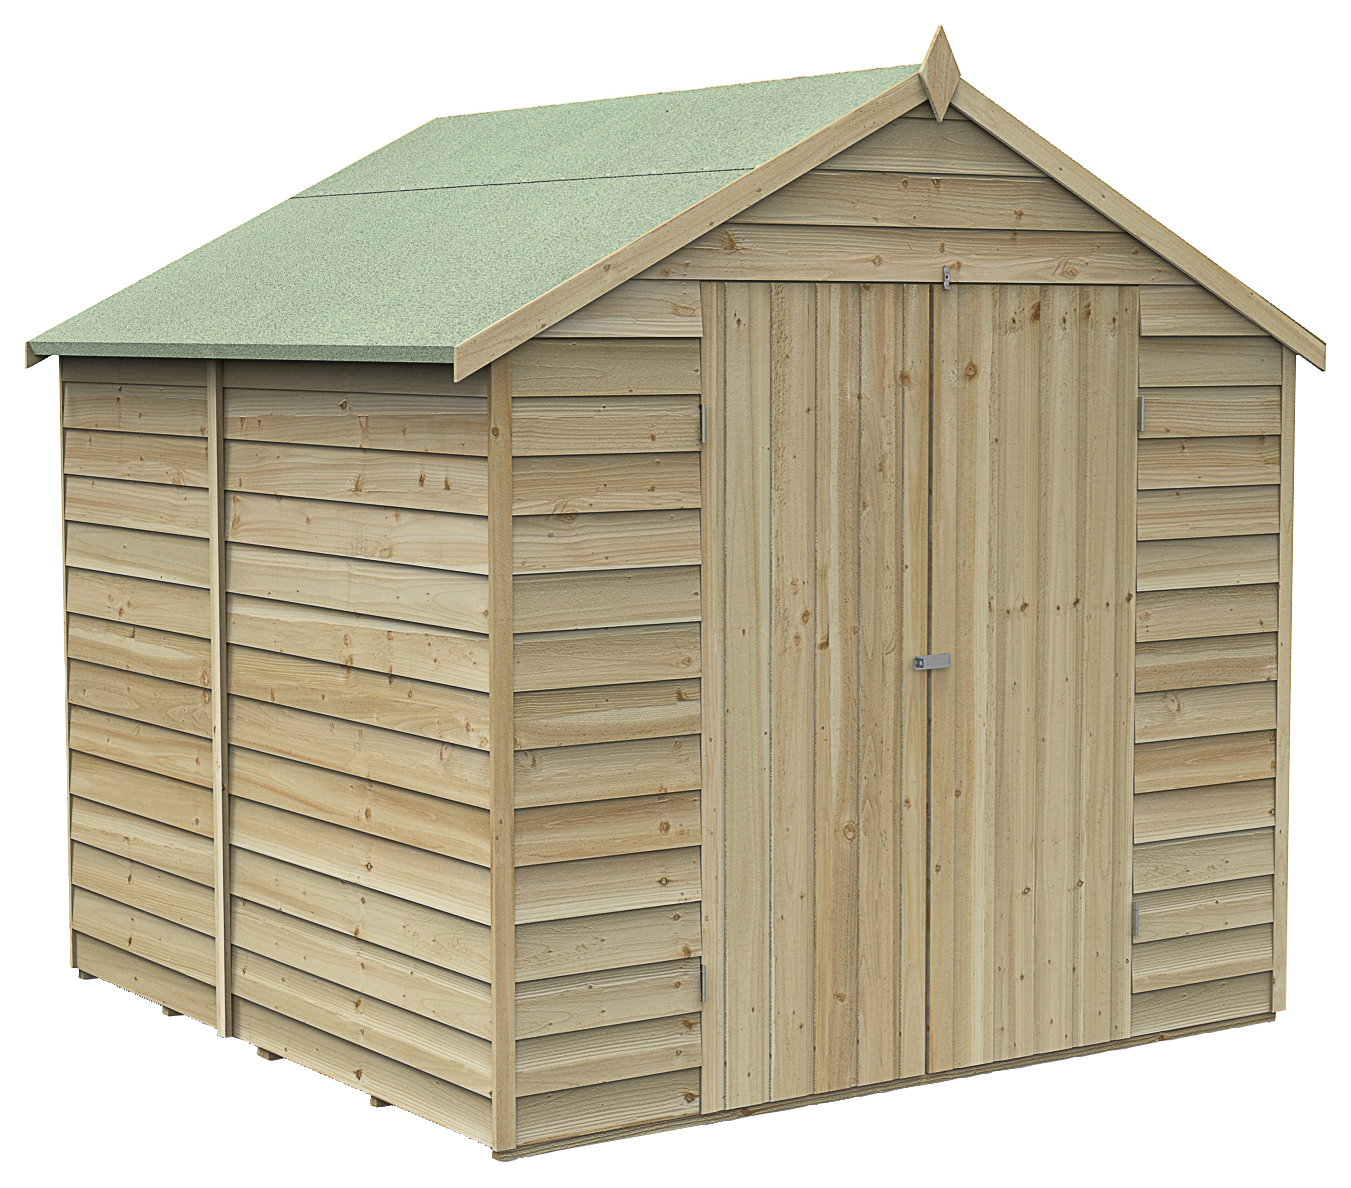 Forest Garden 7 x 7ft 4Life Apex Overlap Pressure Treated Double Door Windowless Shed with Assembly